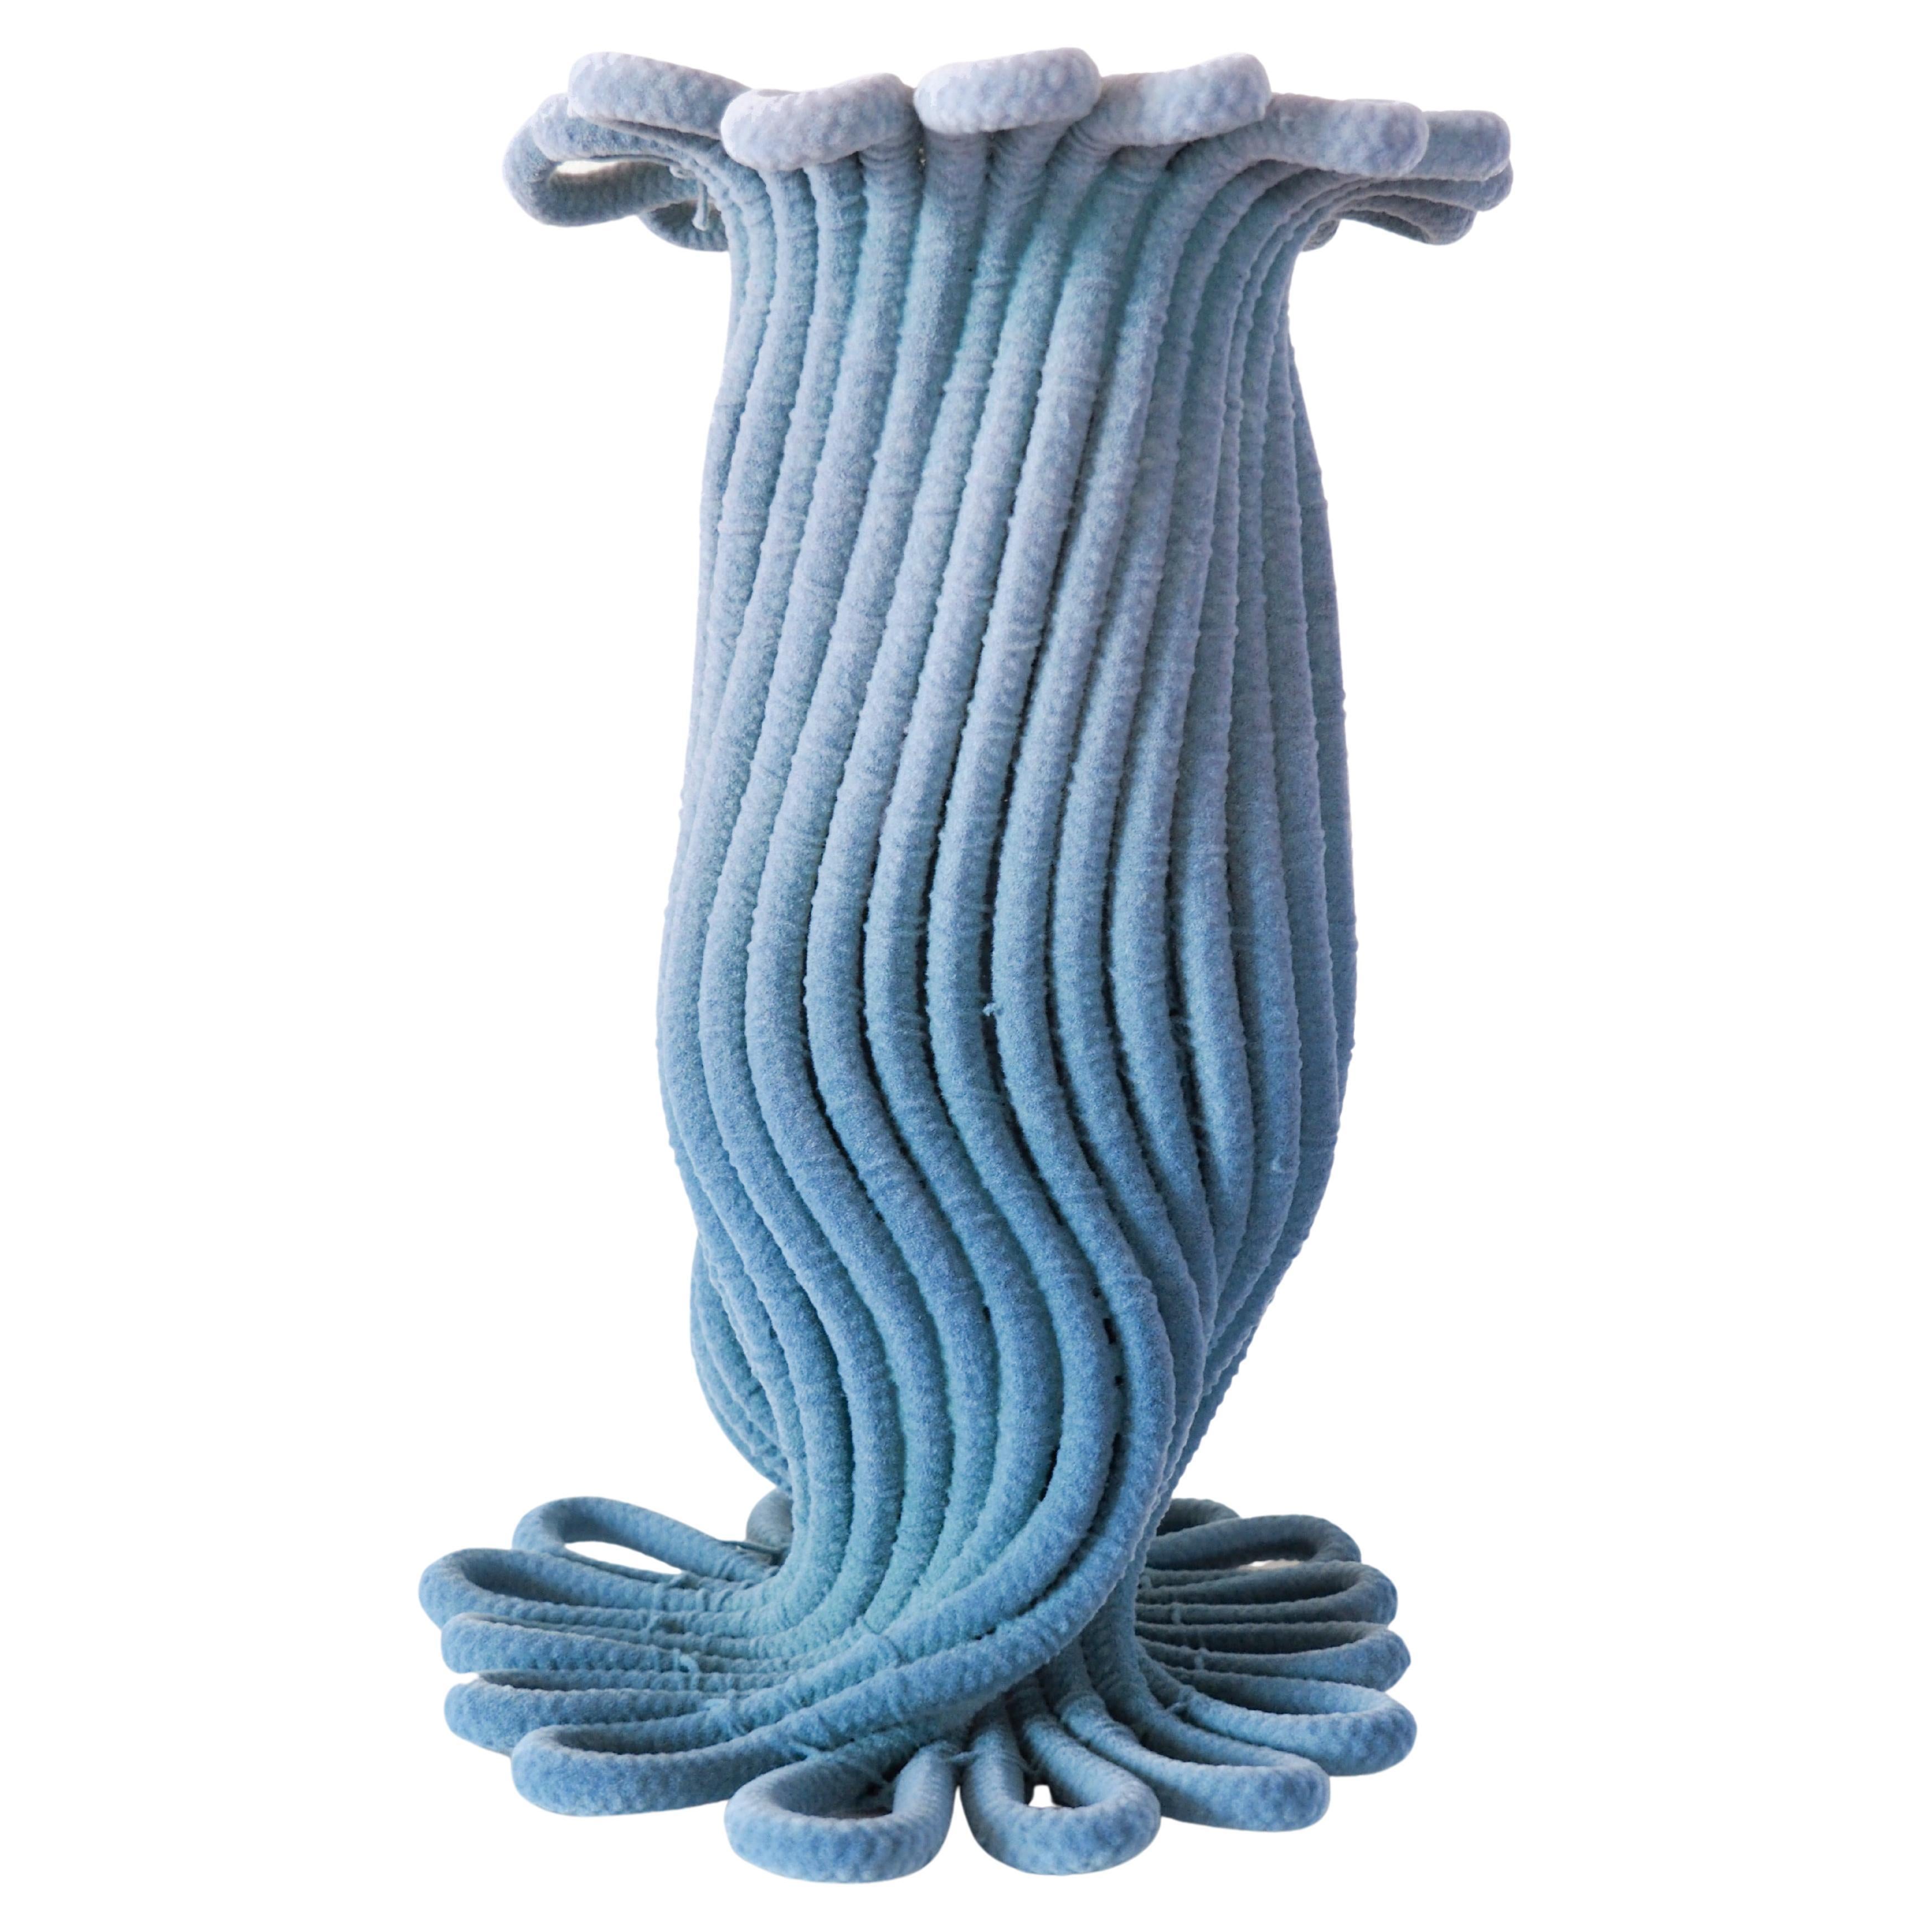 Rope Vases and Vessels